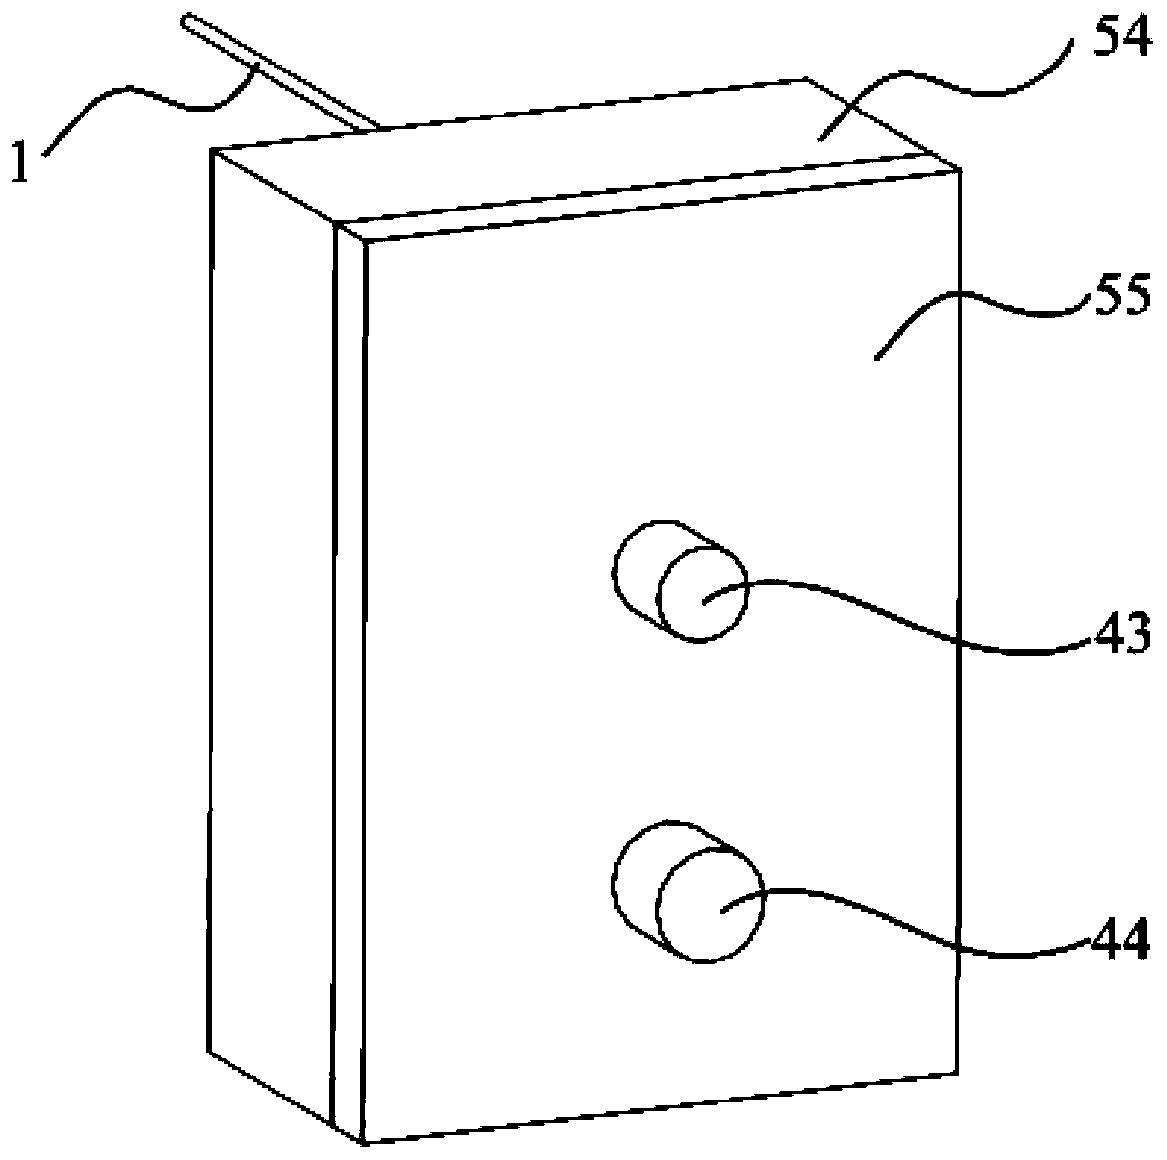 Material blockage detection device